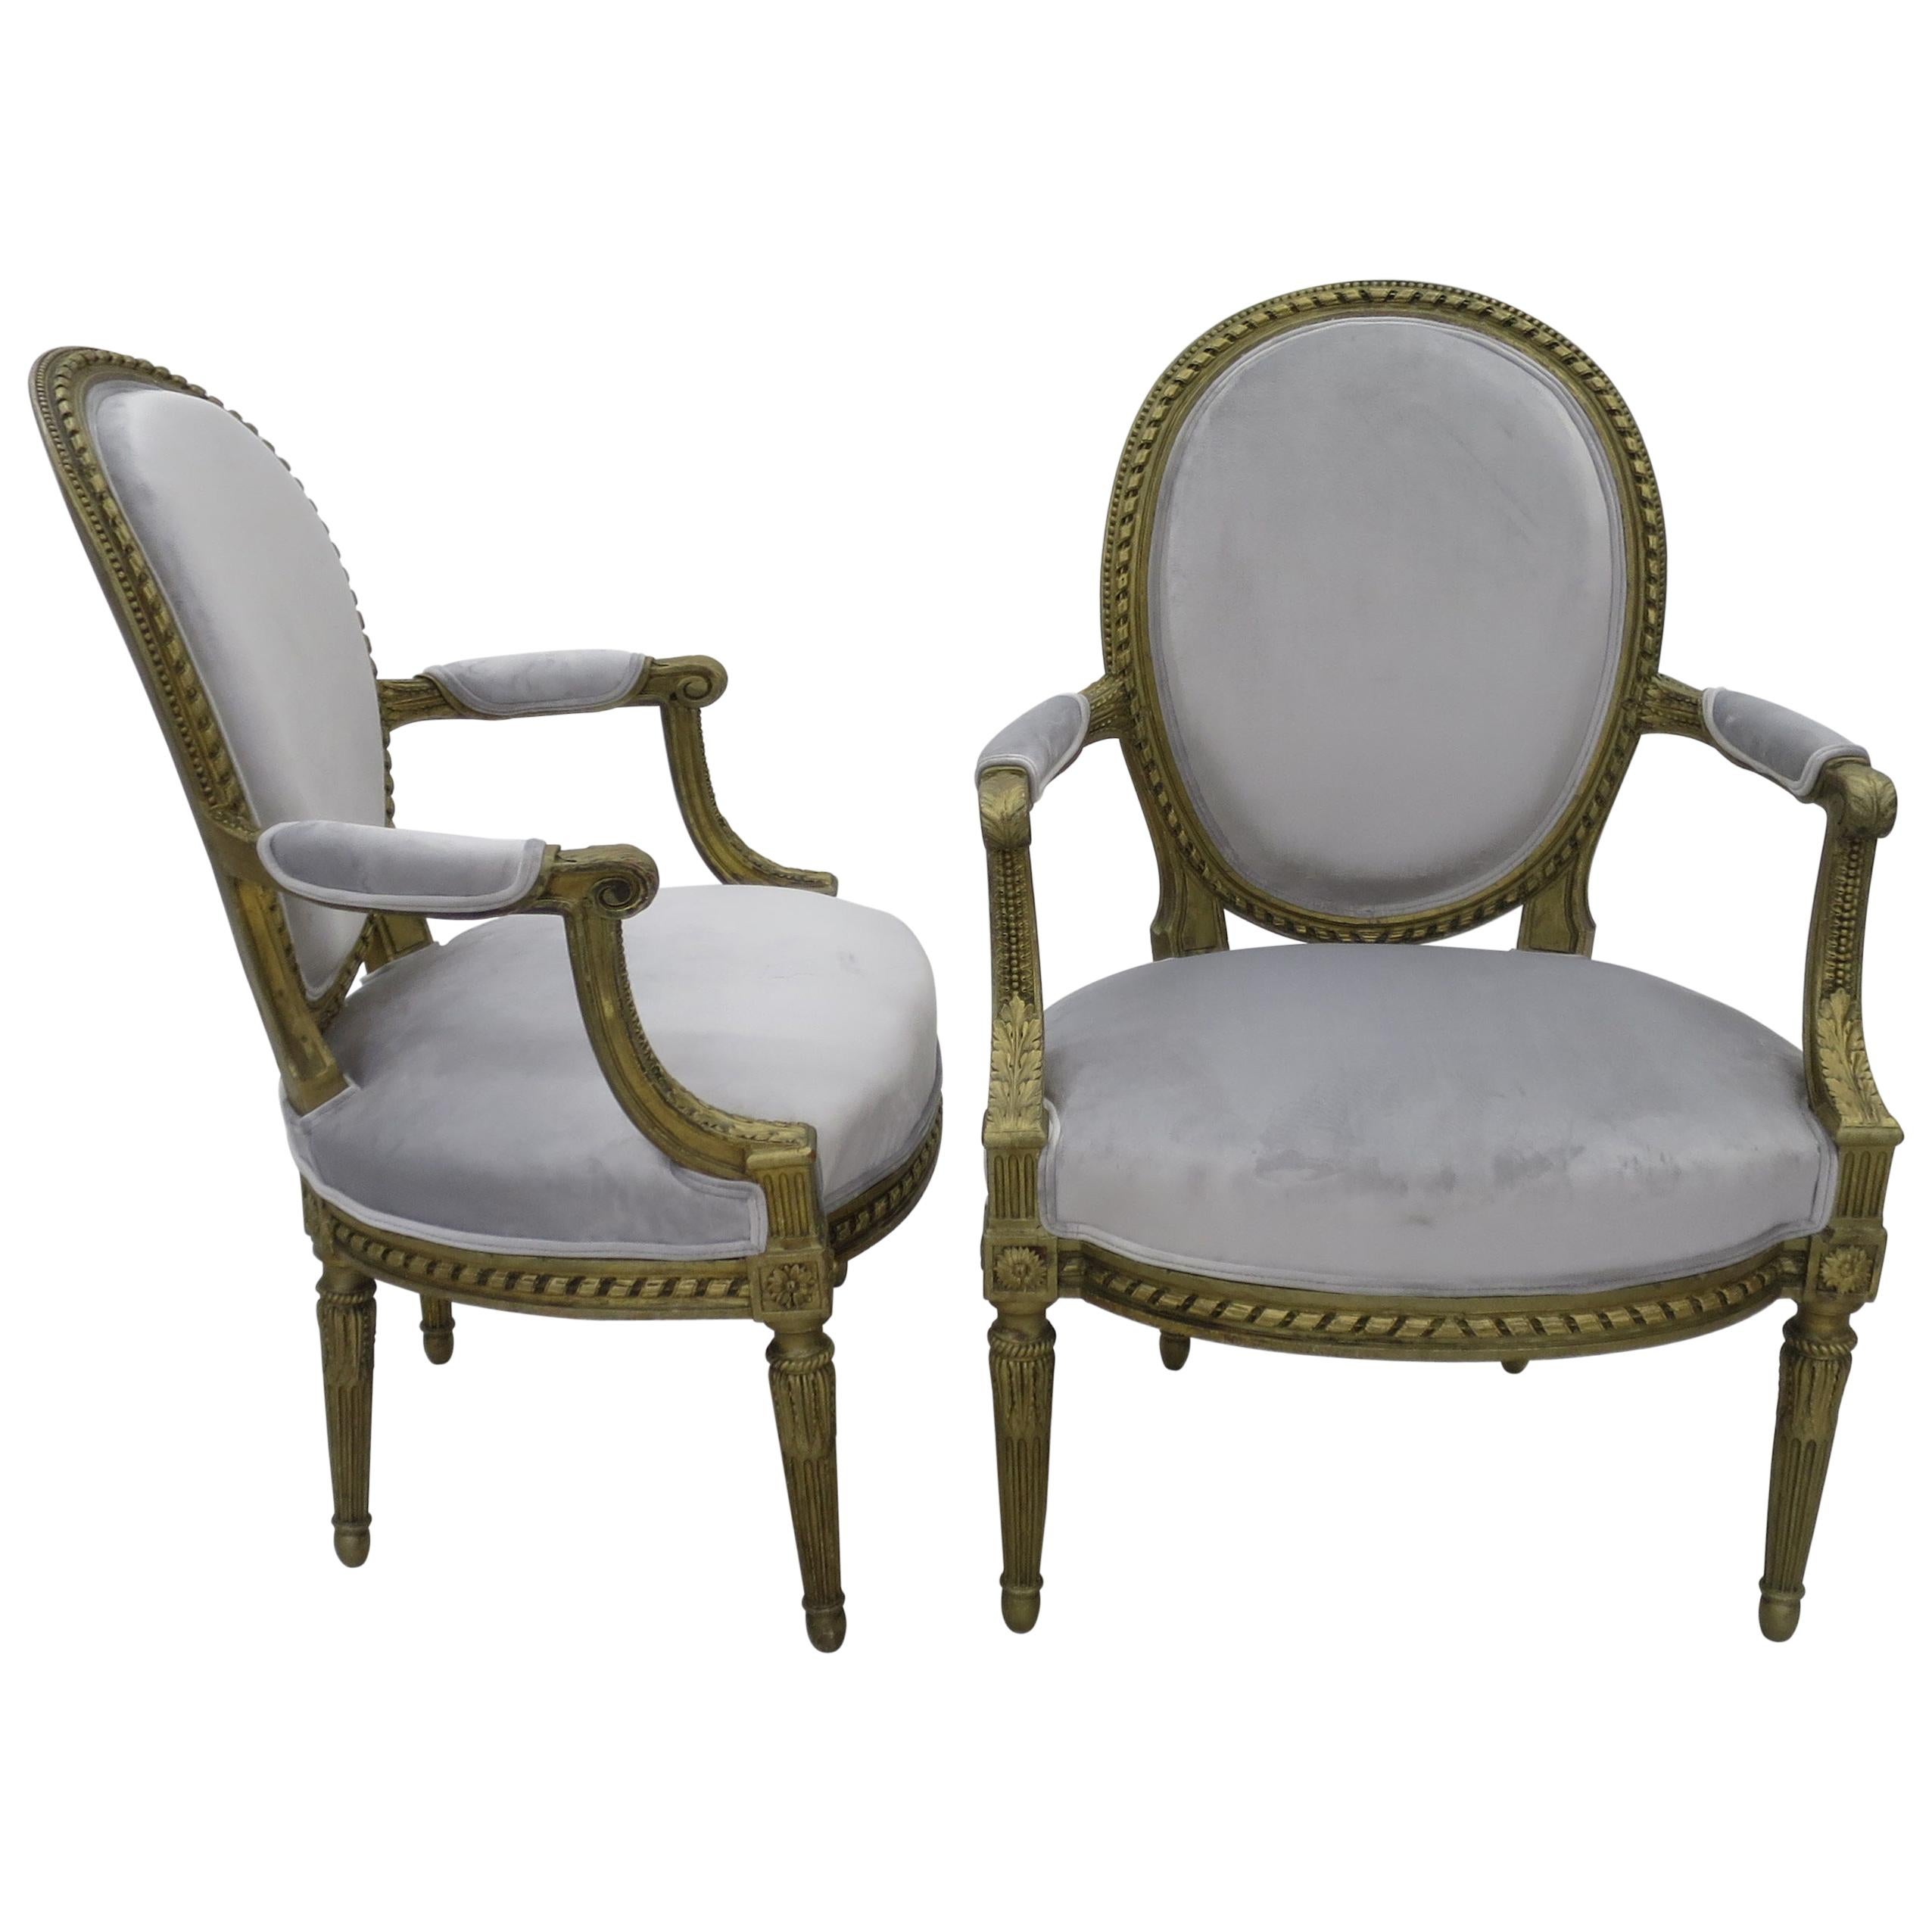 Pair of Cabriolet Armchairs in Giltwood 19th Century Style Louis XVI For Sale